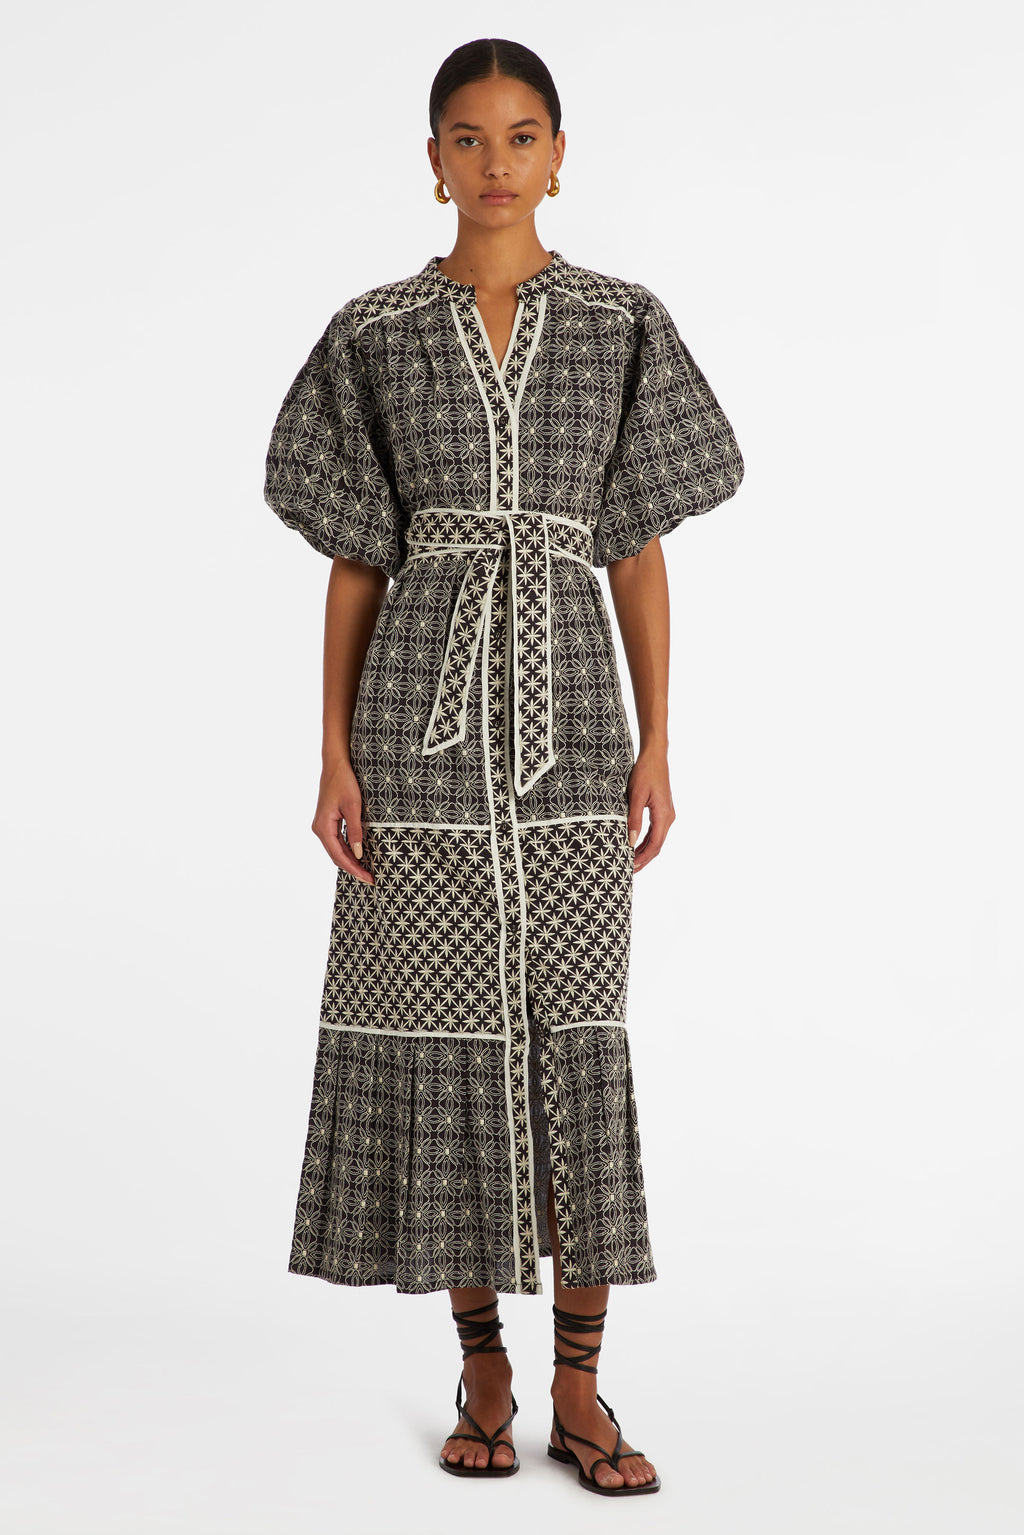 Midi dress with short puff sleeves and a sash belt at the waist